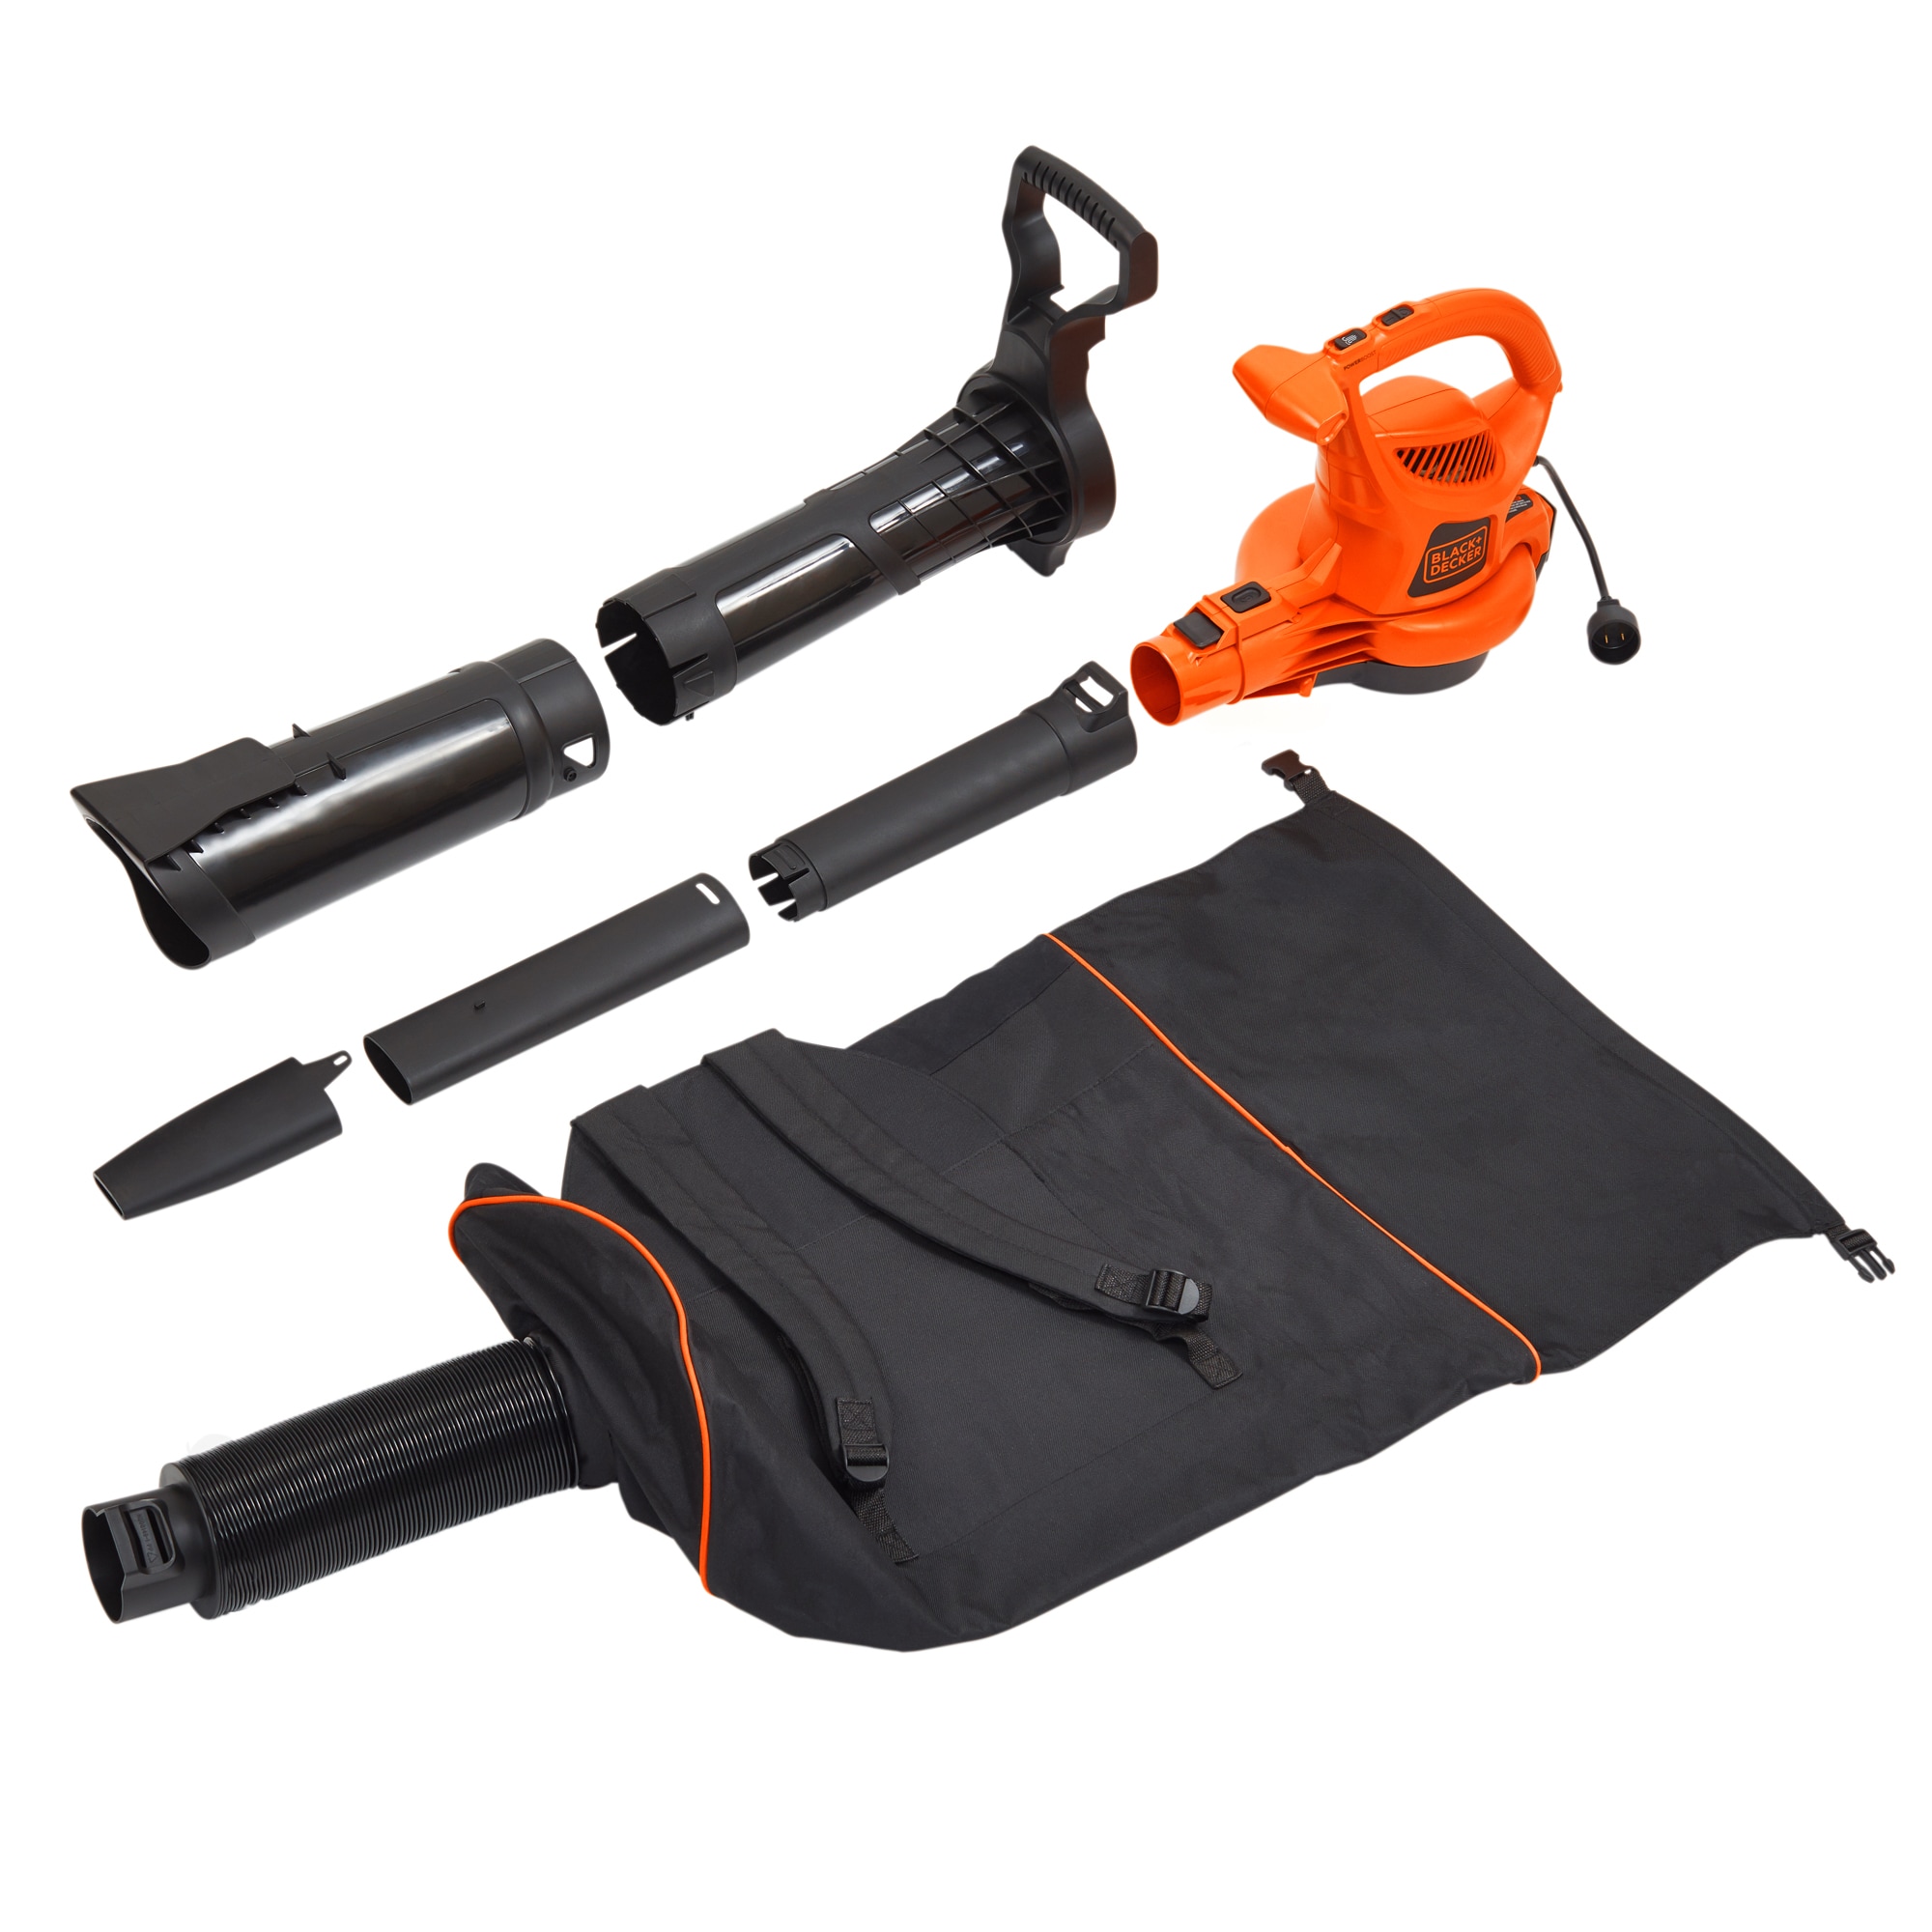  BLACK+DECKER 3-in-1 Leaf Blower, Leaf Vacuum and Mulcher, Up to  230 MPH, 12 Amp, Corded Electric (BV3600) : Patio, Lawn & Garden